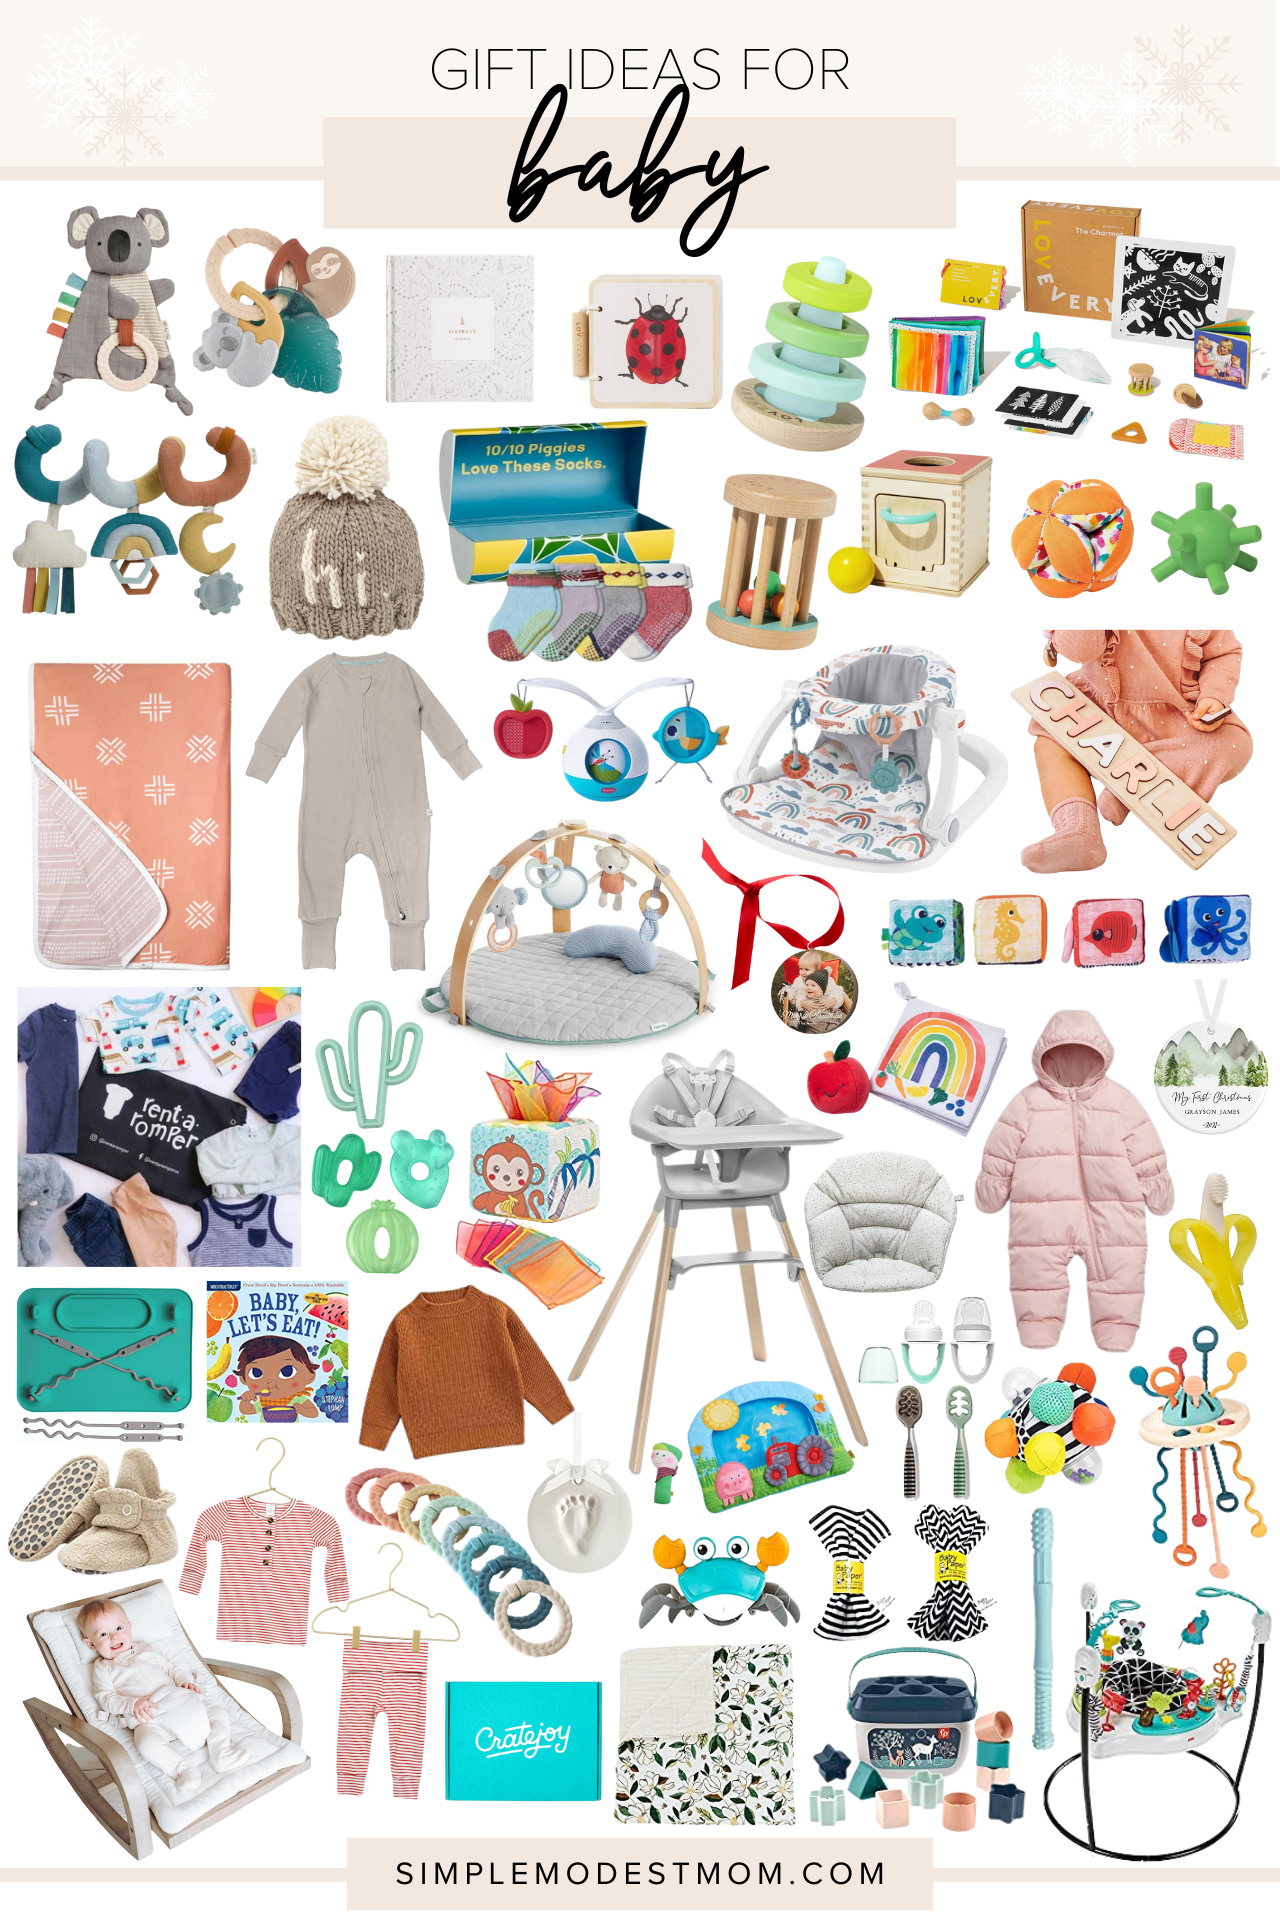 From Toys to Keepsakes: Unique Gift Ideas for Baby's First Year